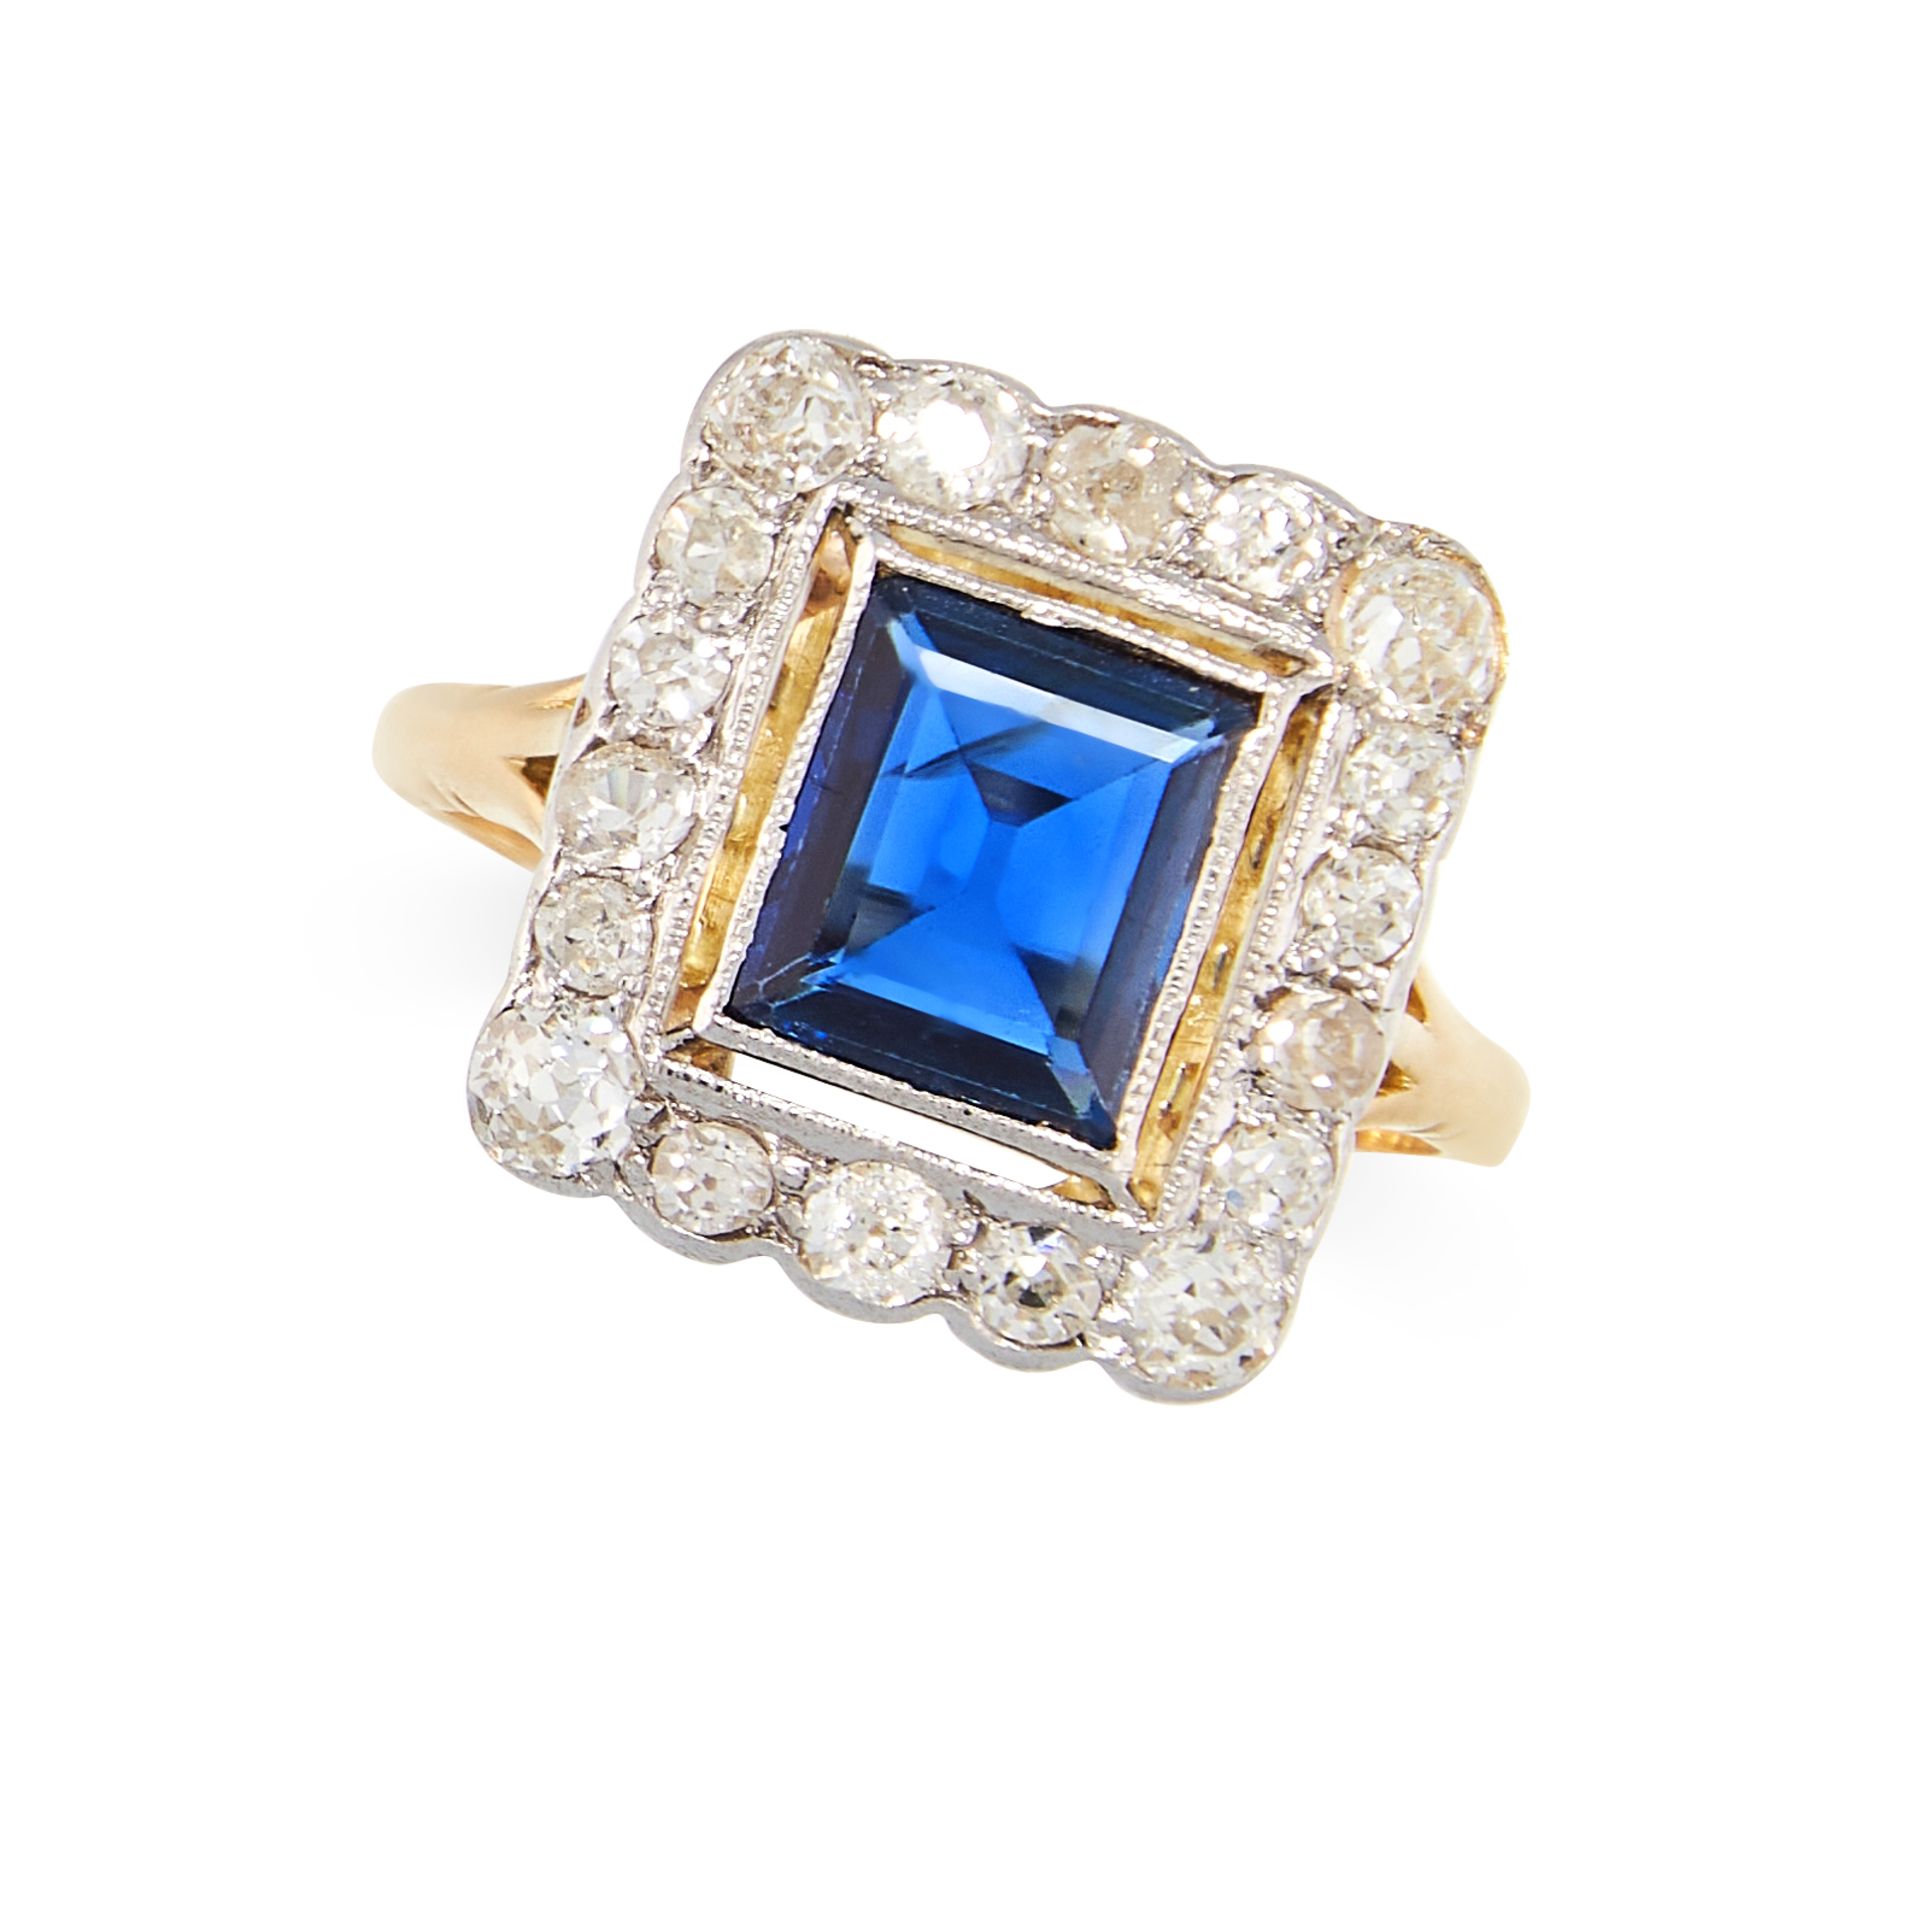 A SAPPHIRE AND DIAMOND RING set with a step cut sapphire of 1.24 carats within a cluster of old